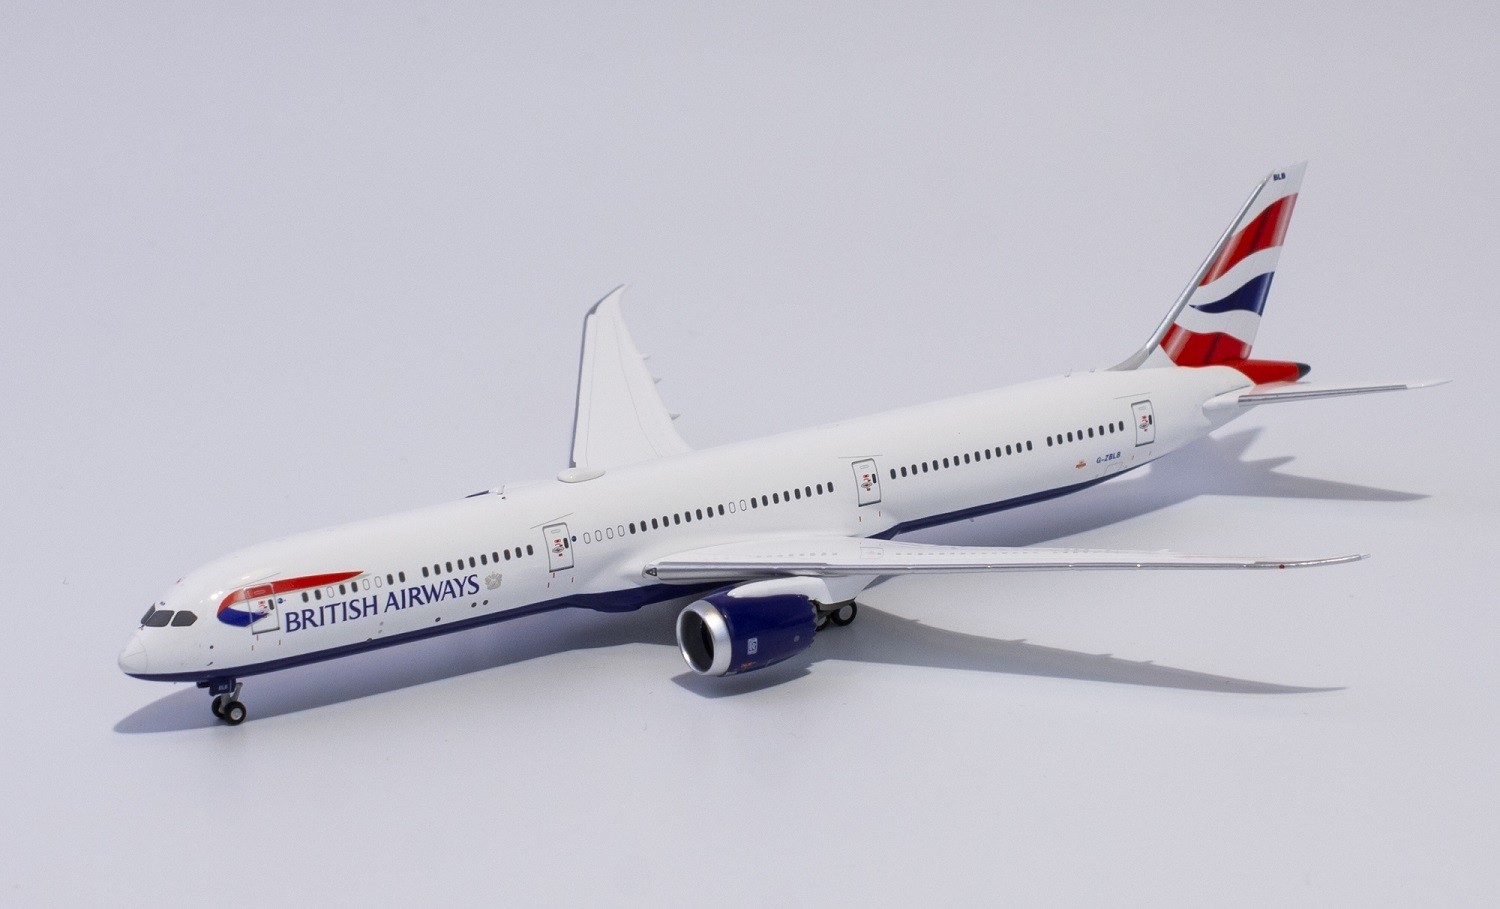 Details about   1:400 NG Models British Airways 787-10 G-ZBLB 56009 Airplane *IN STOCK* 